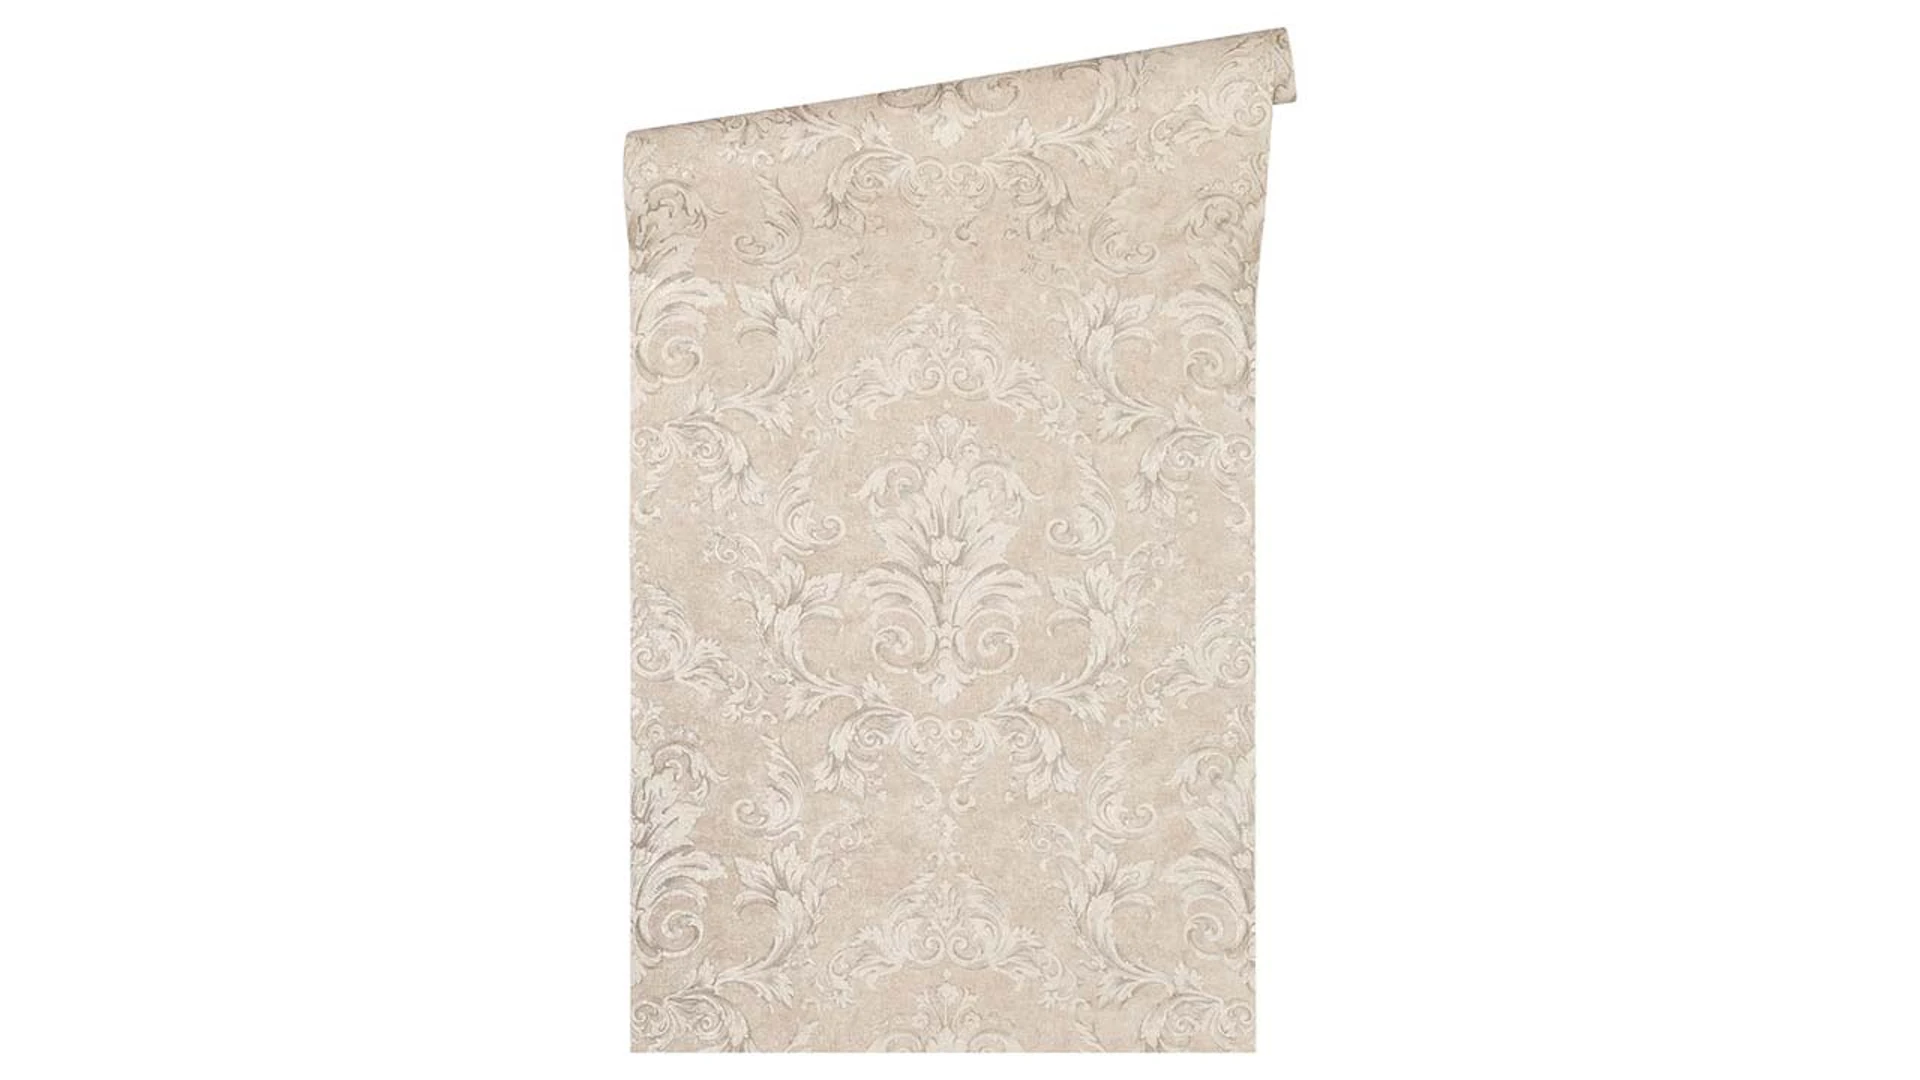 vinyl wallcovering textured wallpaper beige classic country style baroque ornaments flowers & nature Versace 2 152